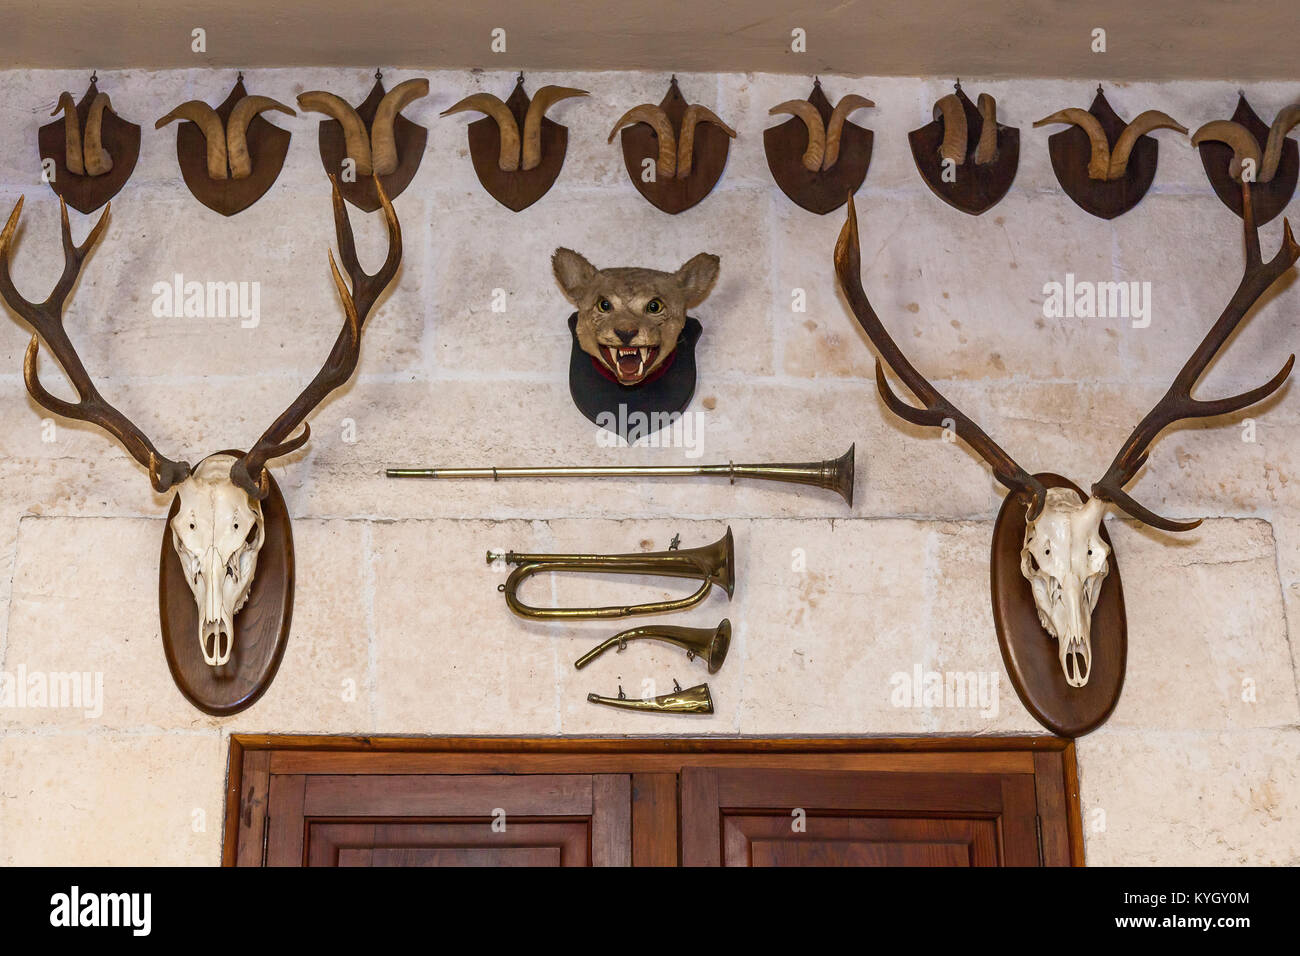 Animal heads on the wall. Stock Photo